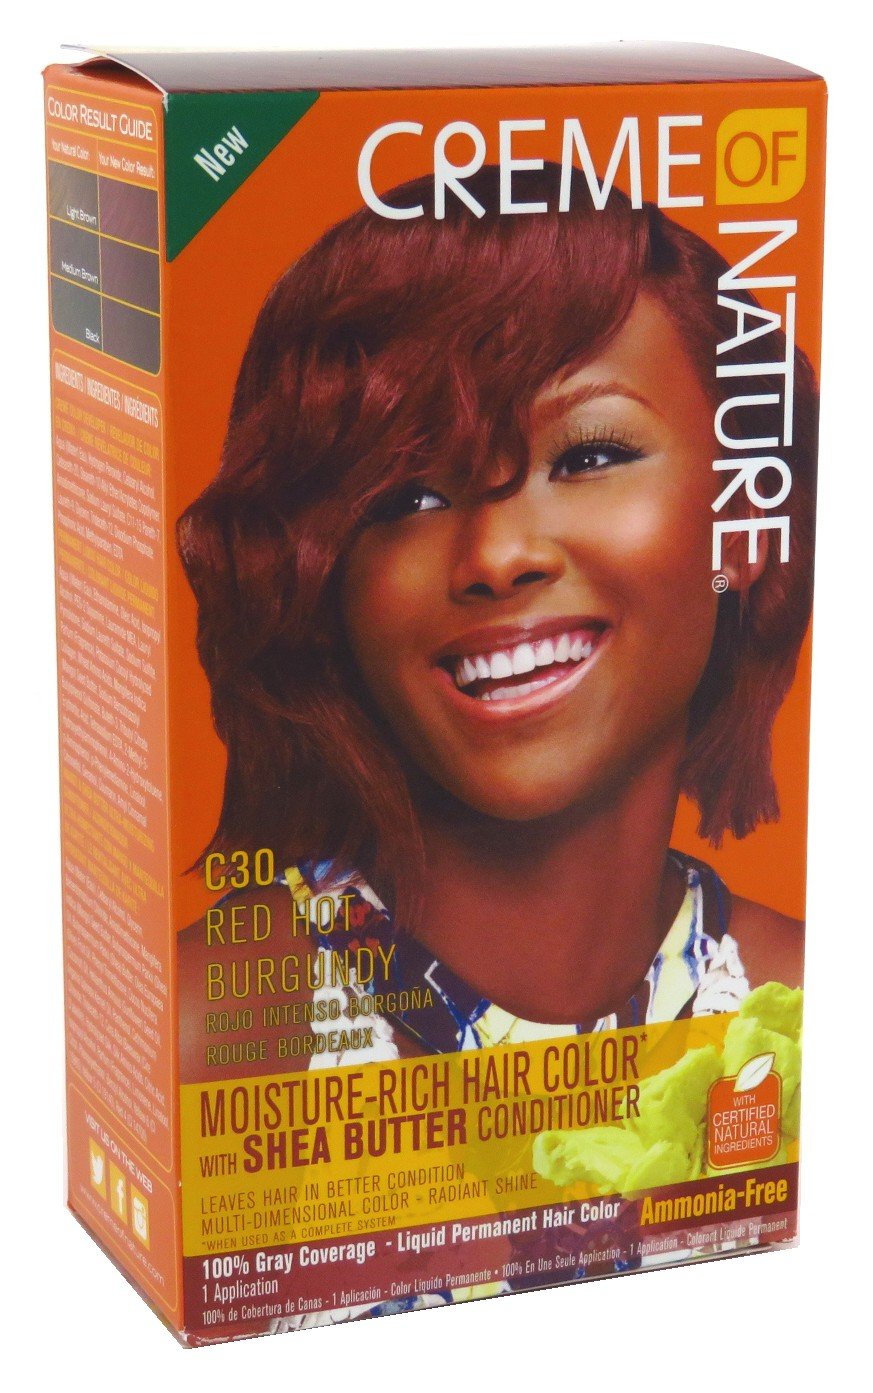 CREME OF NATURE MOISTURE-RICH HAIR COLOR WITH SHEA BUTTER CONDITIONER